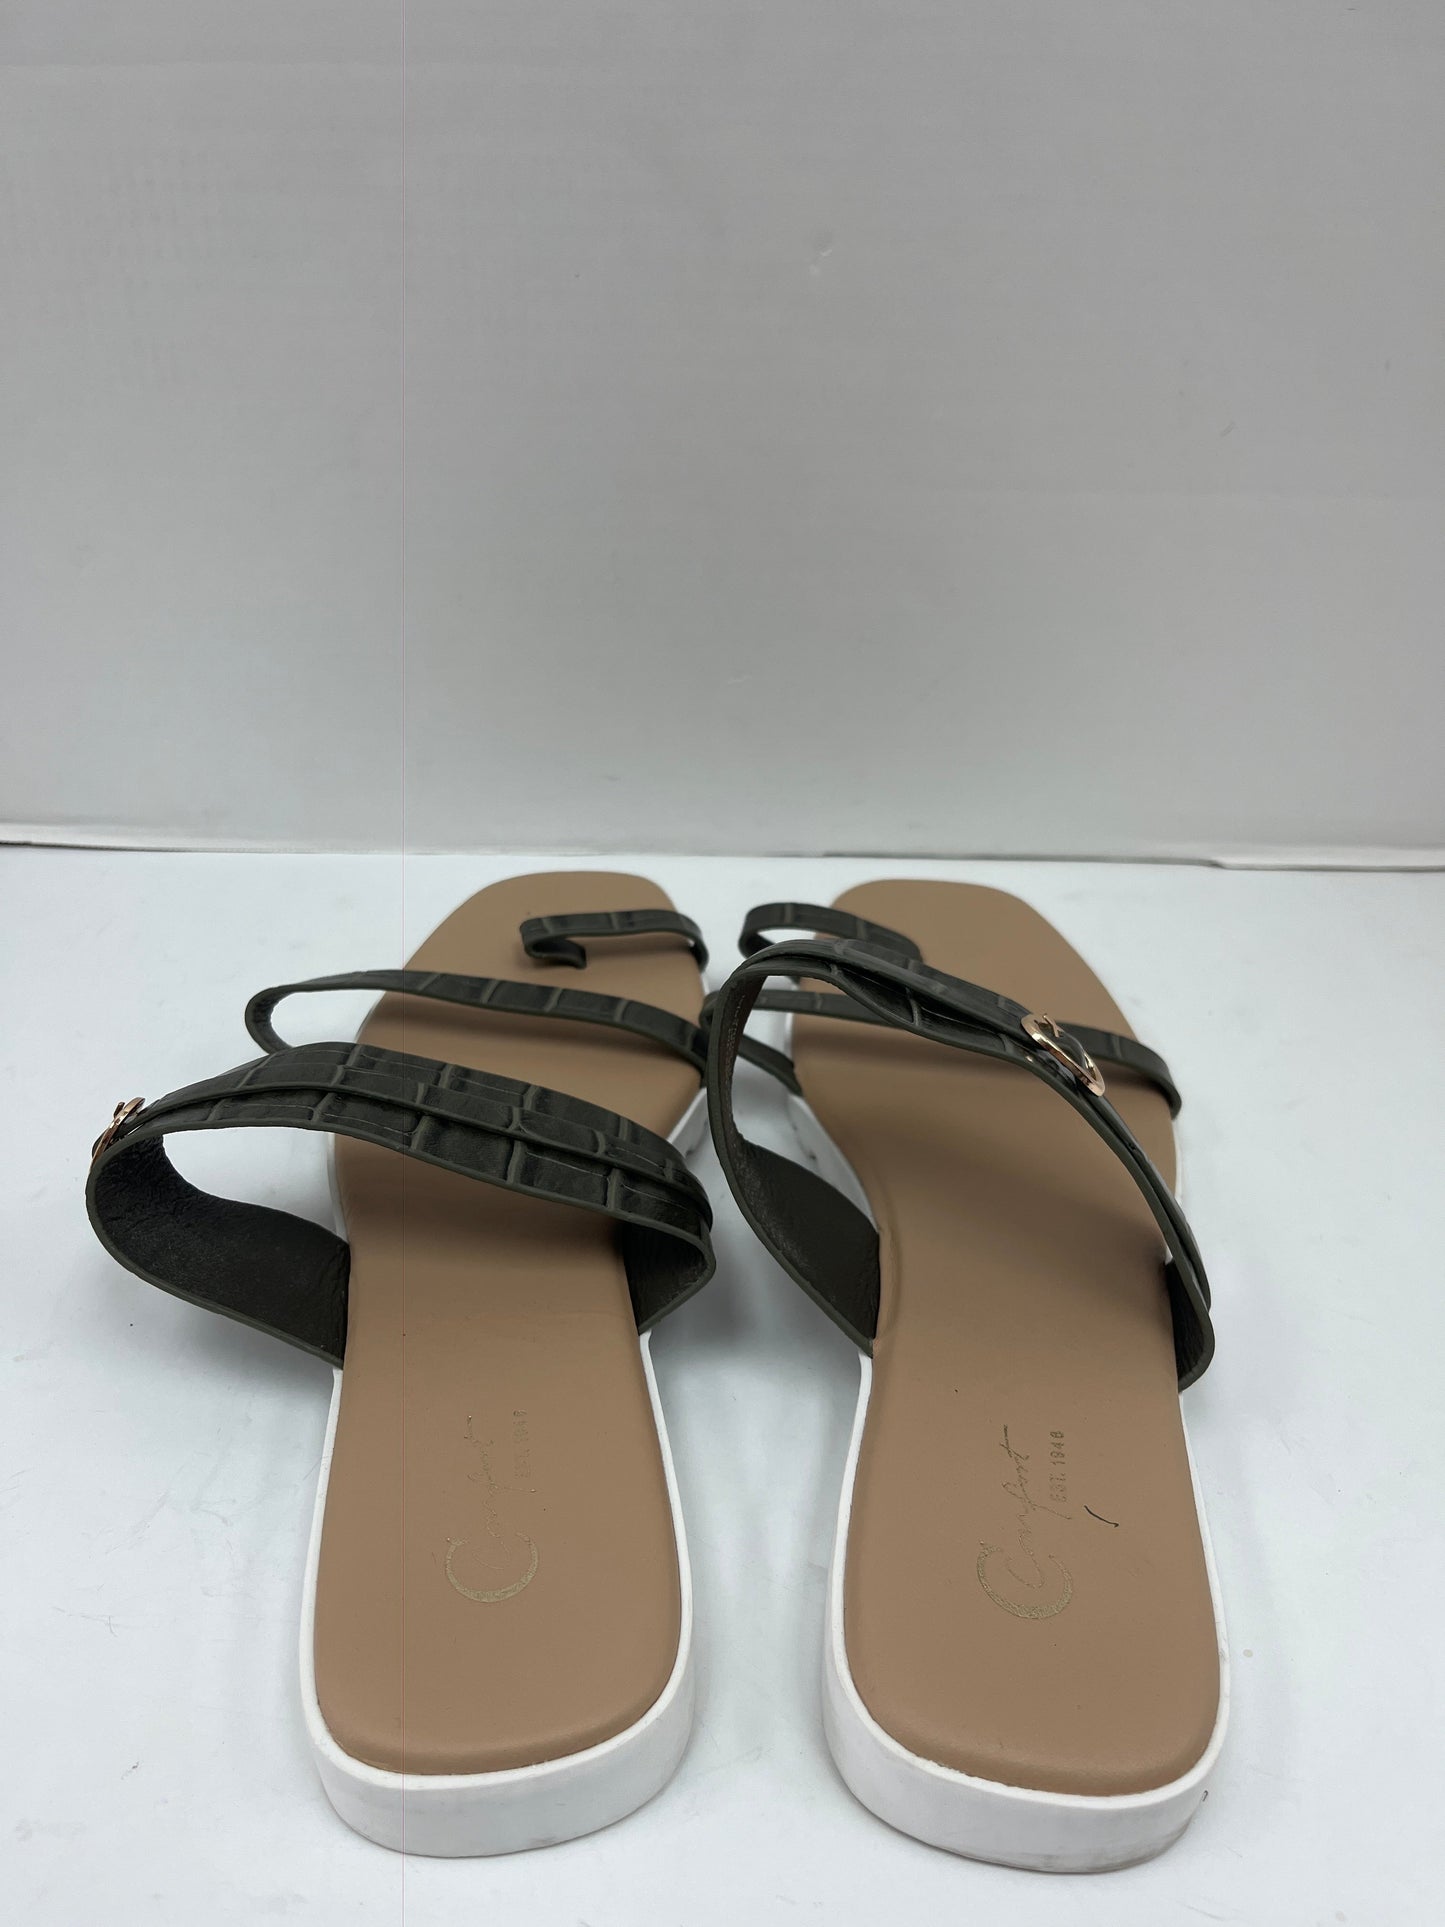 Sandals Flats By Cato  Size: 11